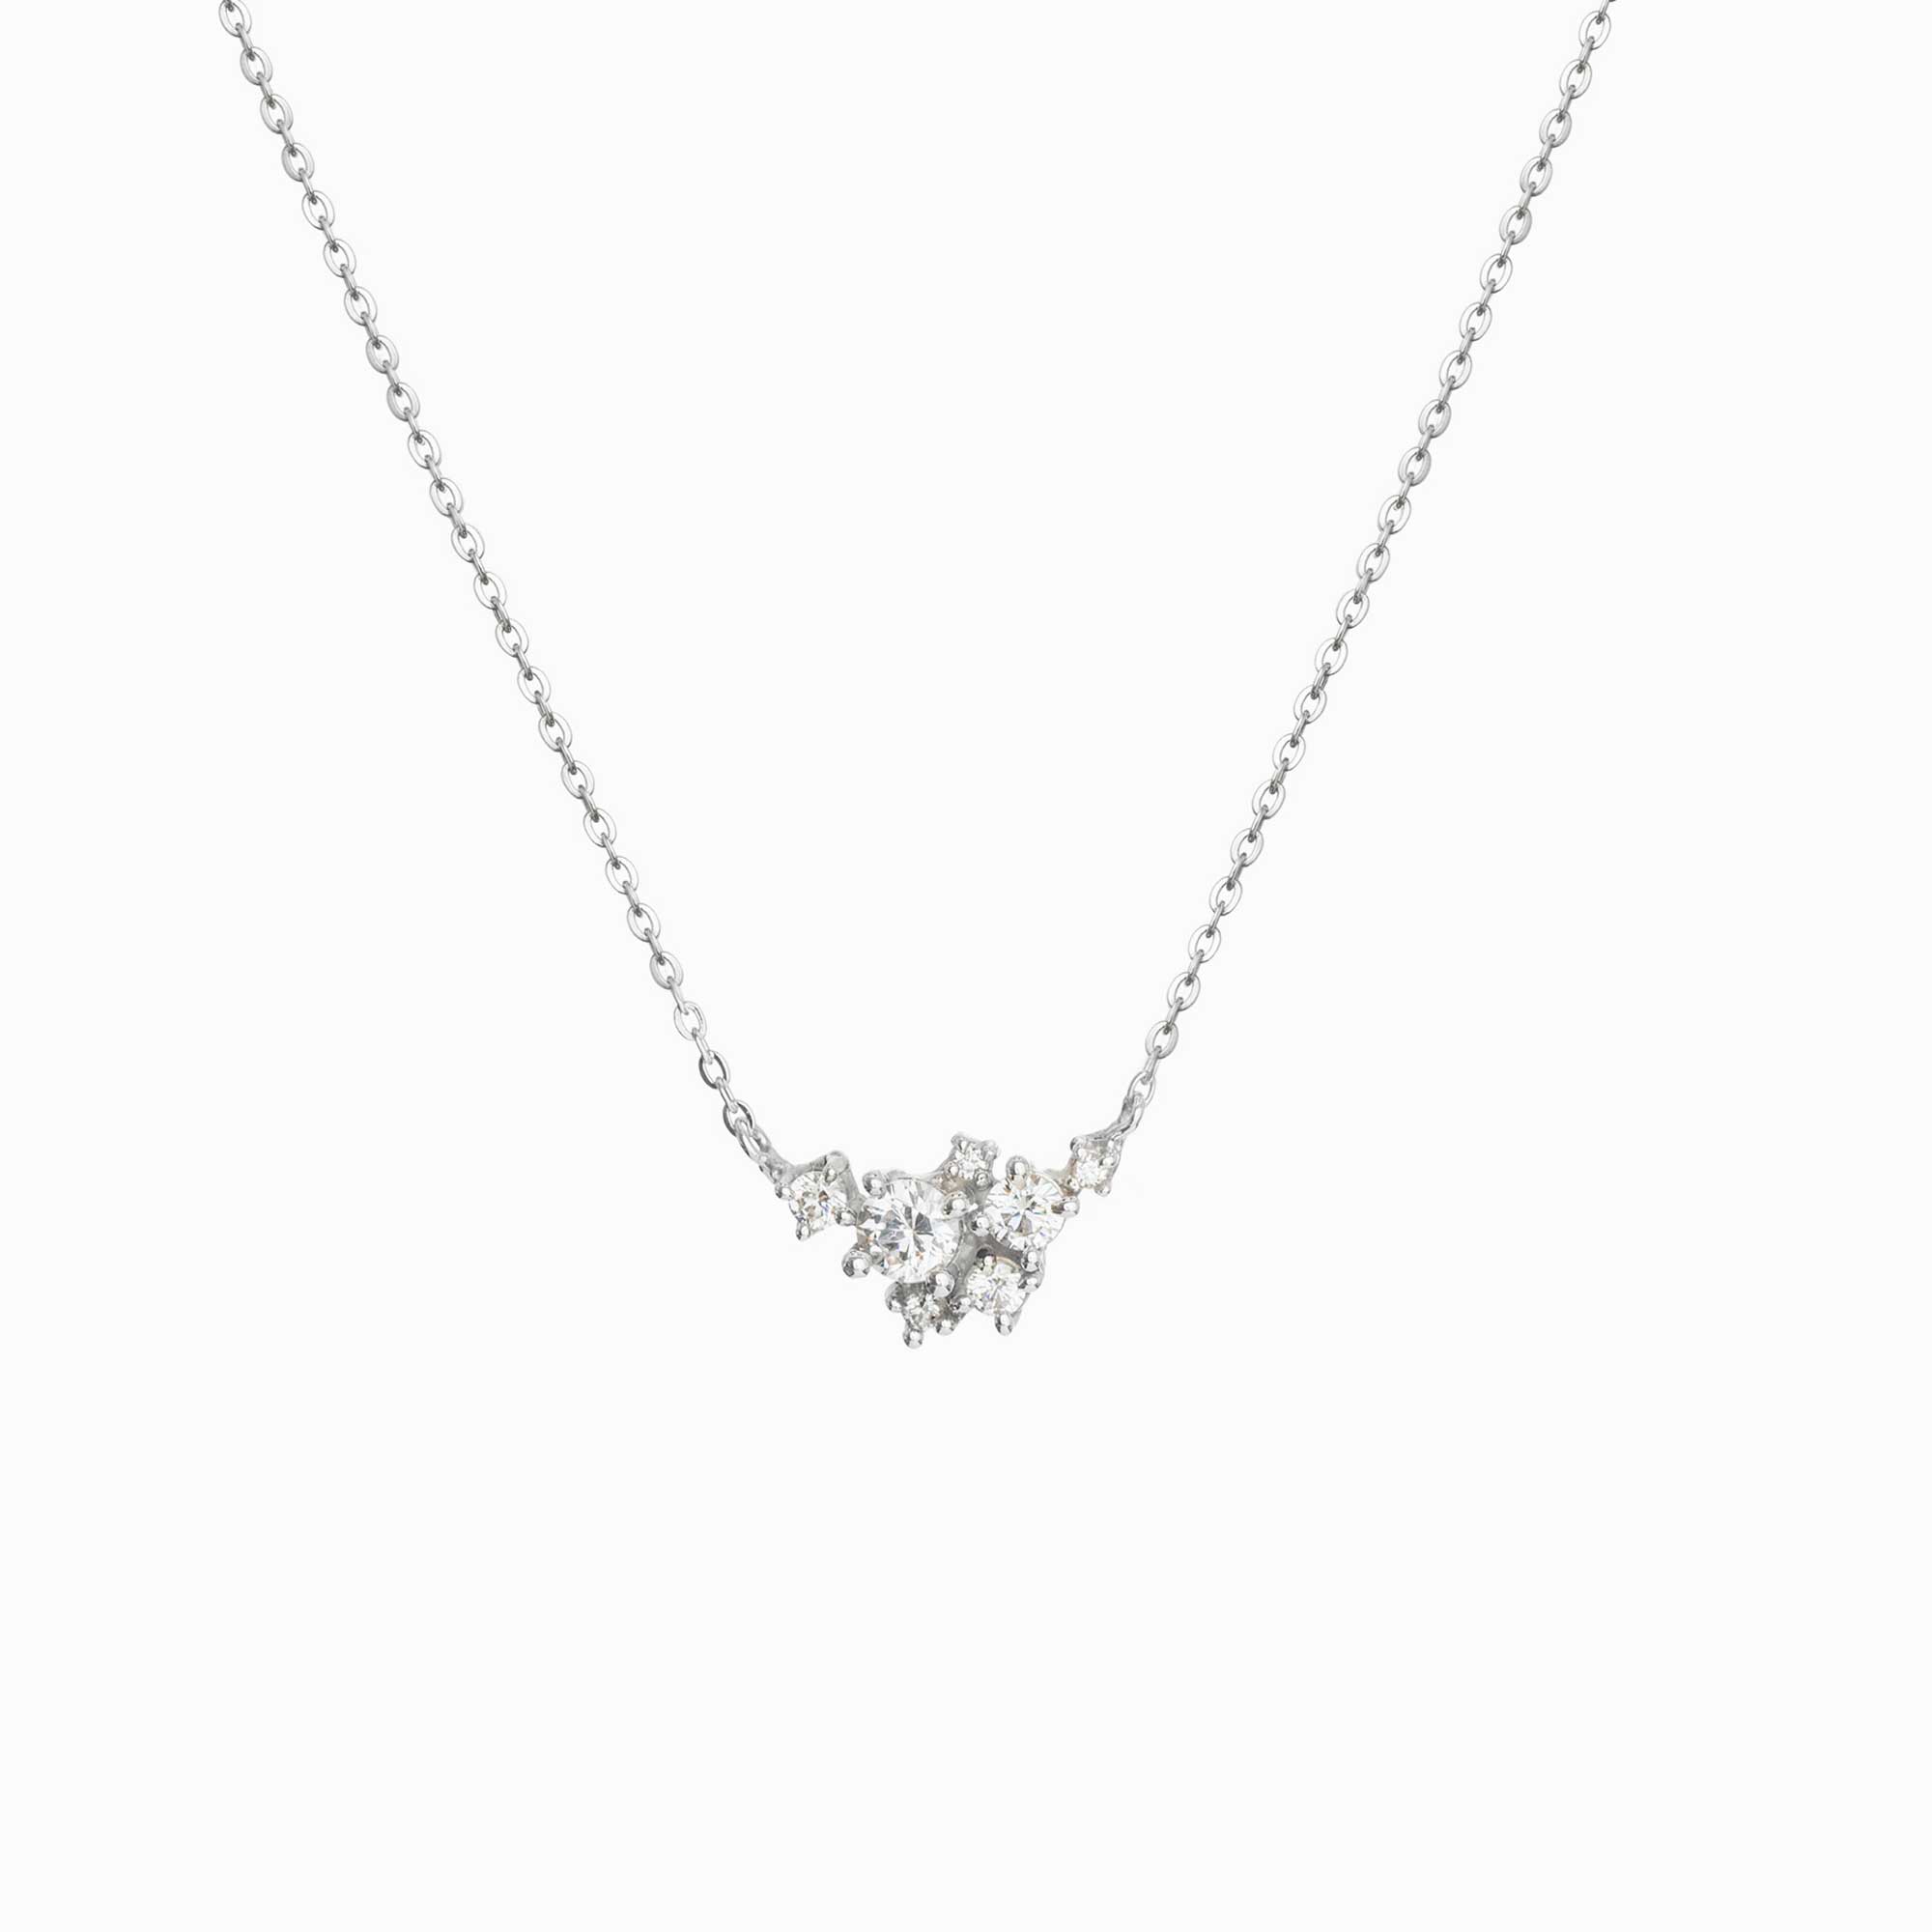 Diamond Cluster Necklaces - A Shimmering Galaxy Of Elegance